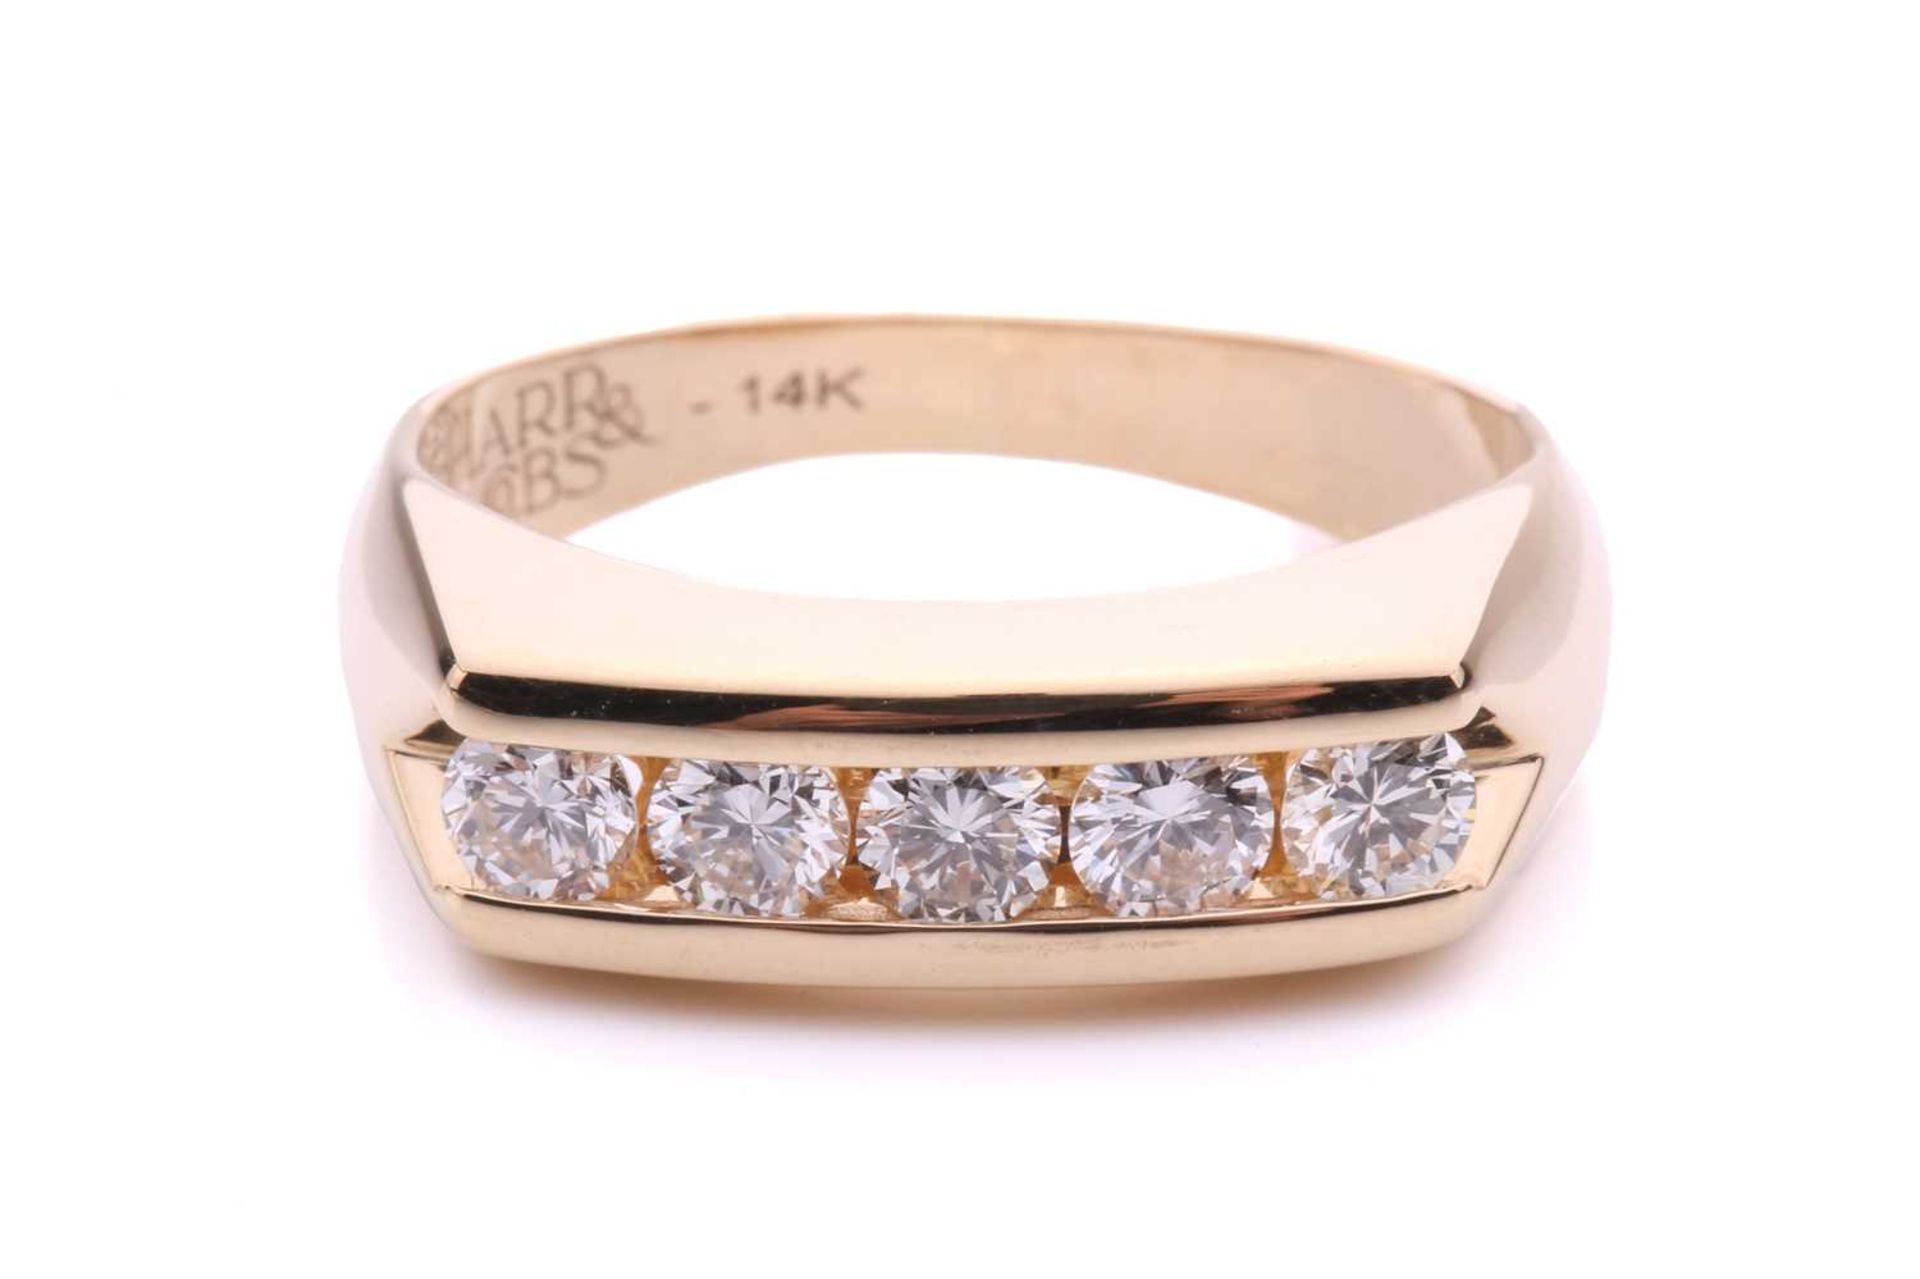 A 5-stone diamond set bar ring, with 5 channel set round brilliant cut diamonds measuring 3.5mm each